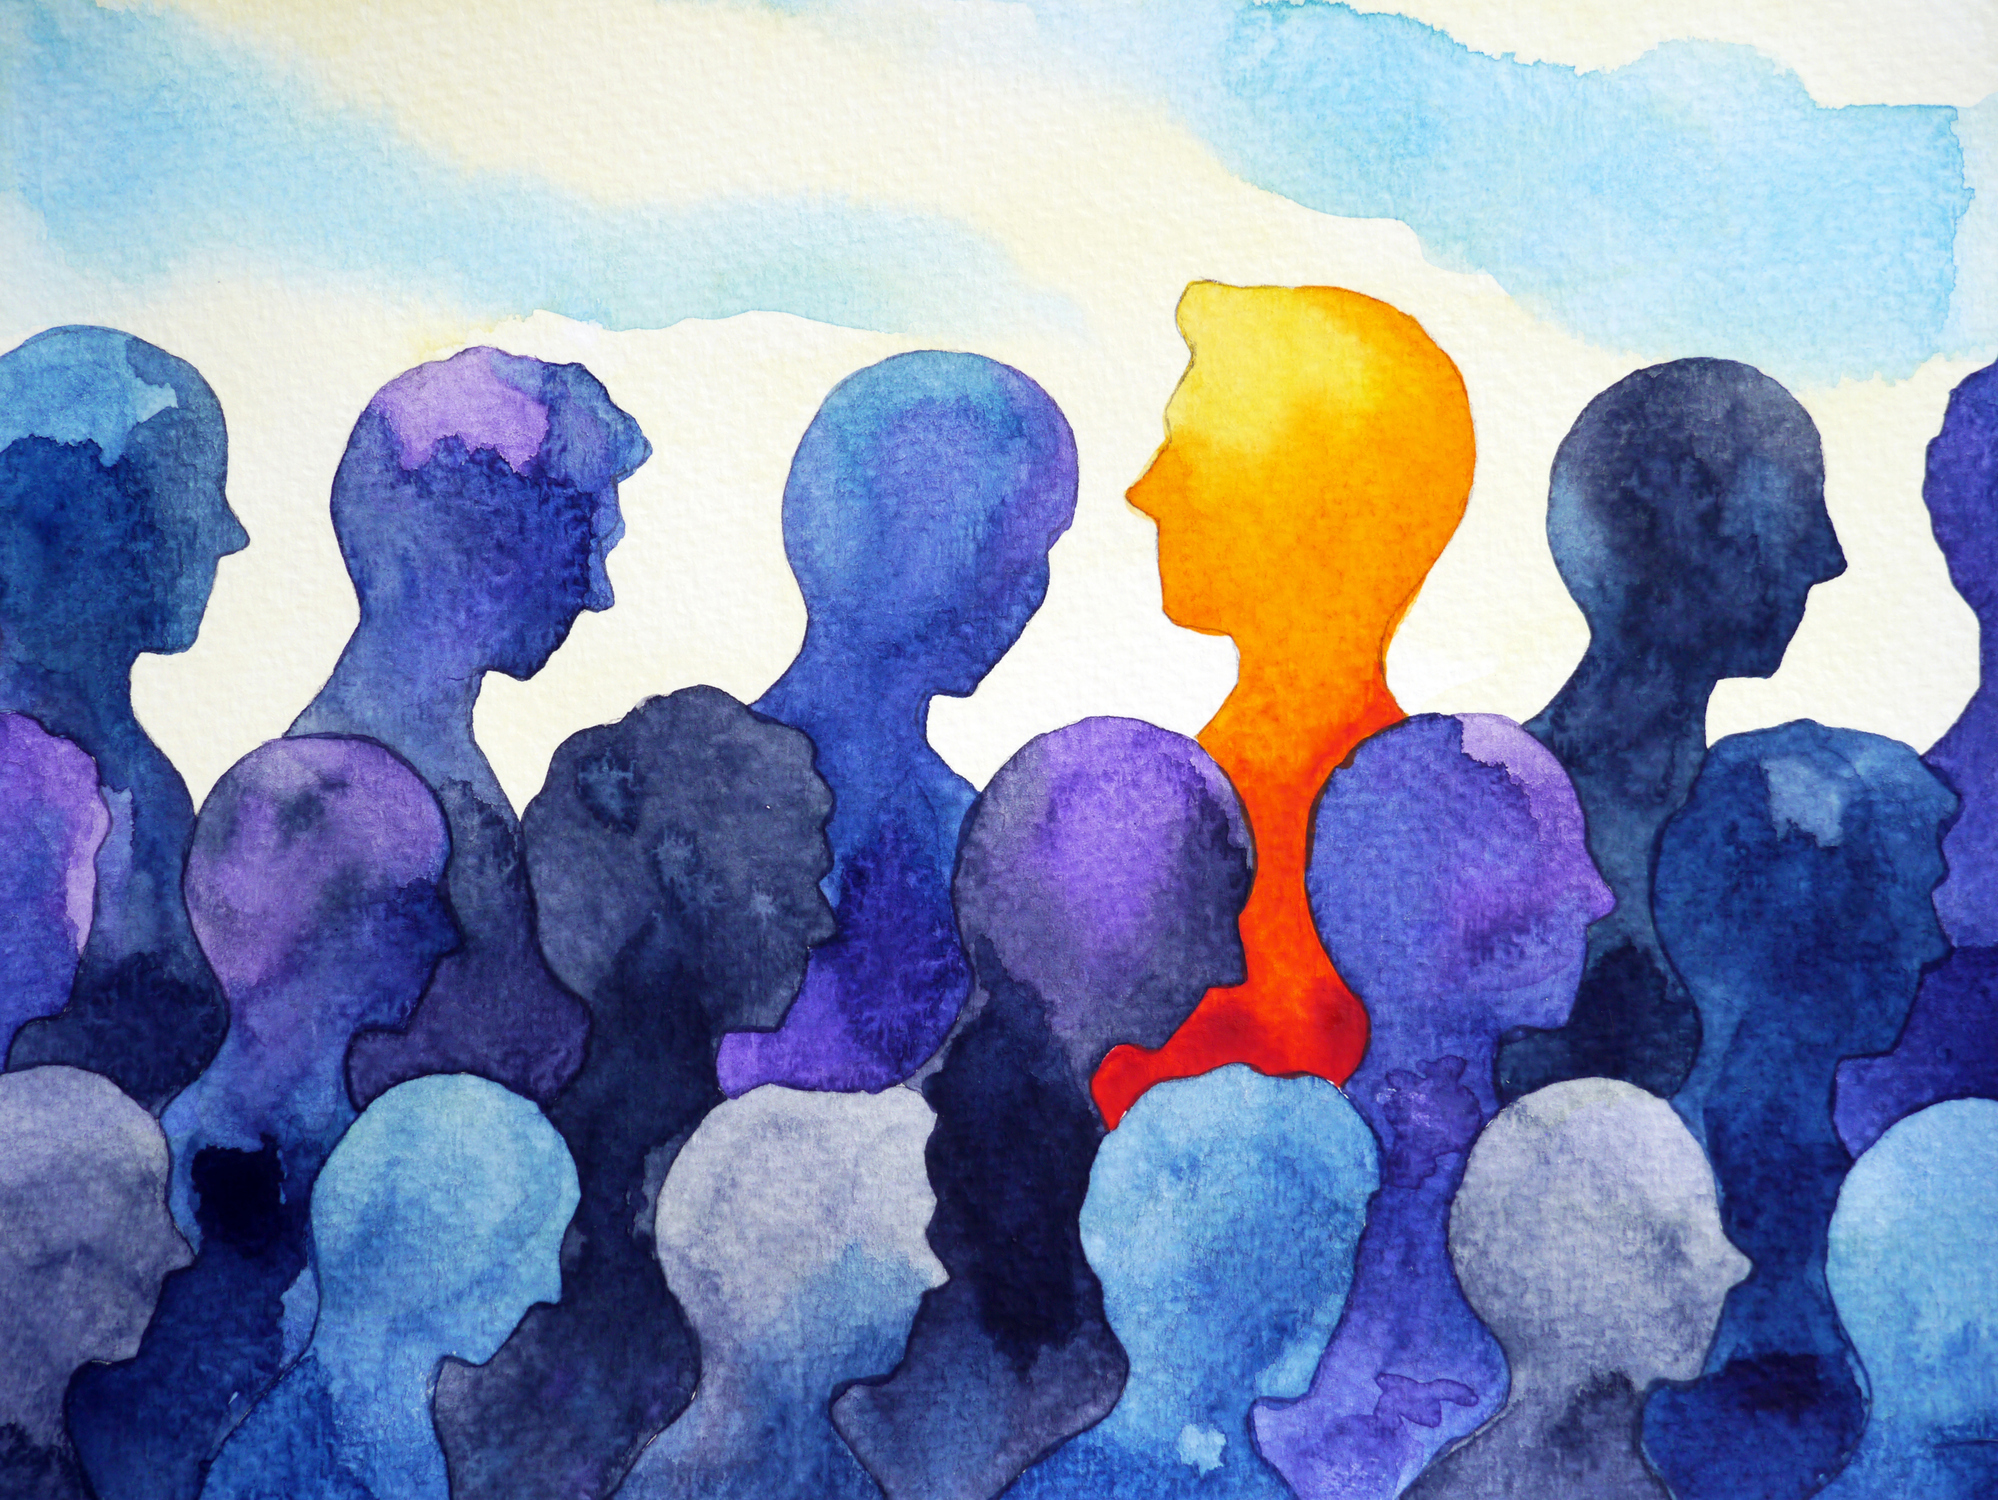 Stylized watercolor image of rows of faces in profile. Most are shades of blue and purple facing one direction, while one profile is yellow, orange, and red, facing the opposite direction. 